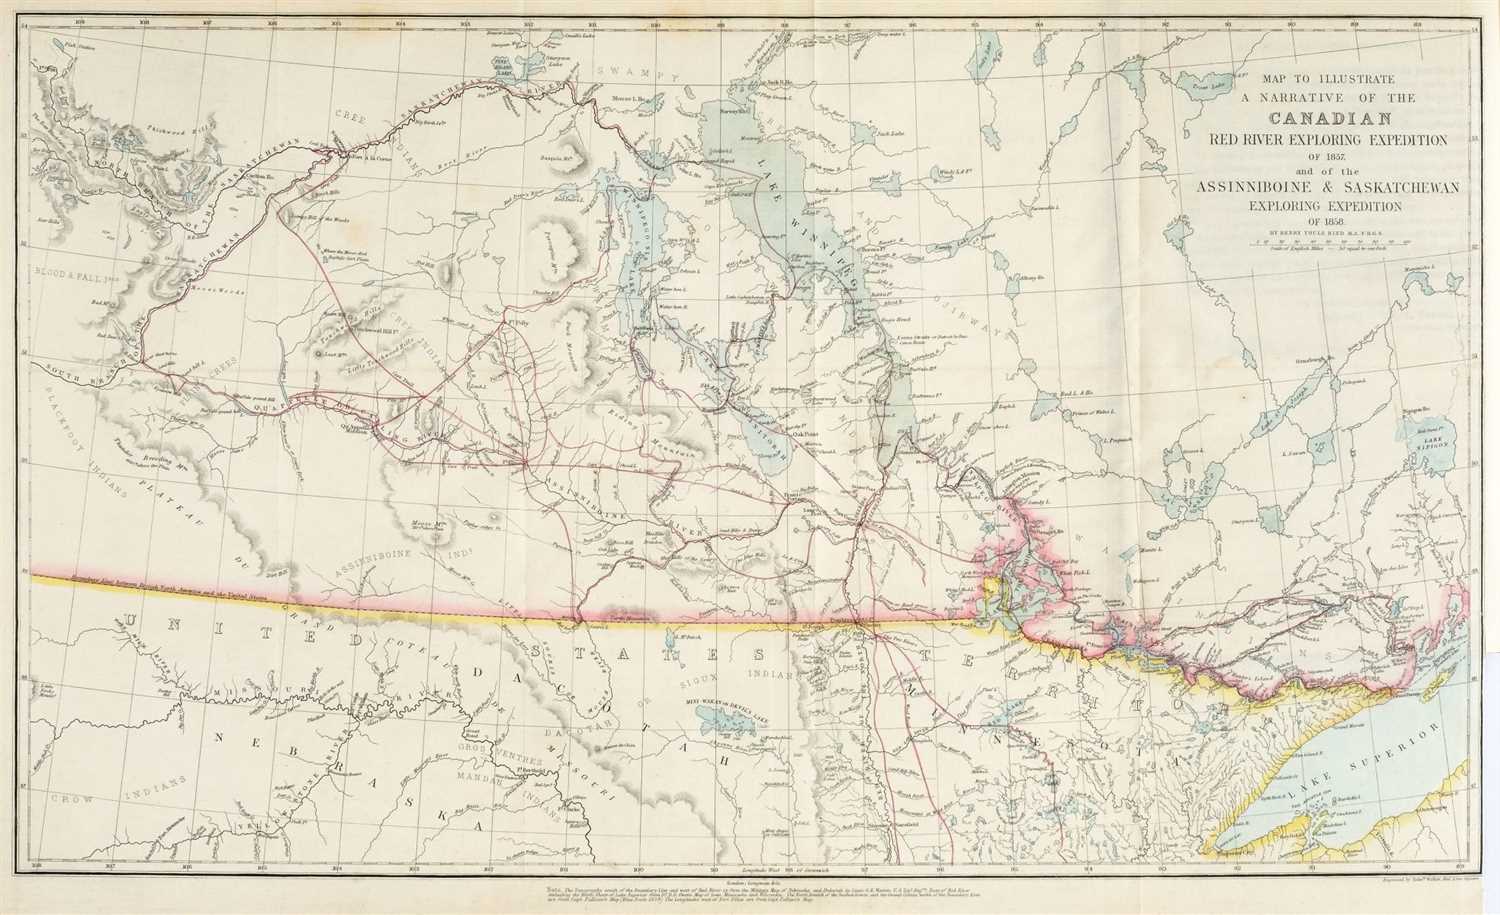 Lot 383 - Hind (Henry Youle). Narrative of the Canadian Red River Exploring Expedition, 1860